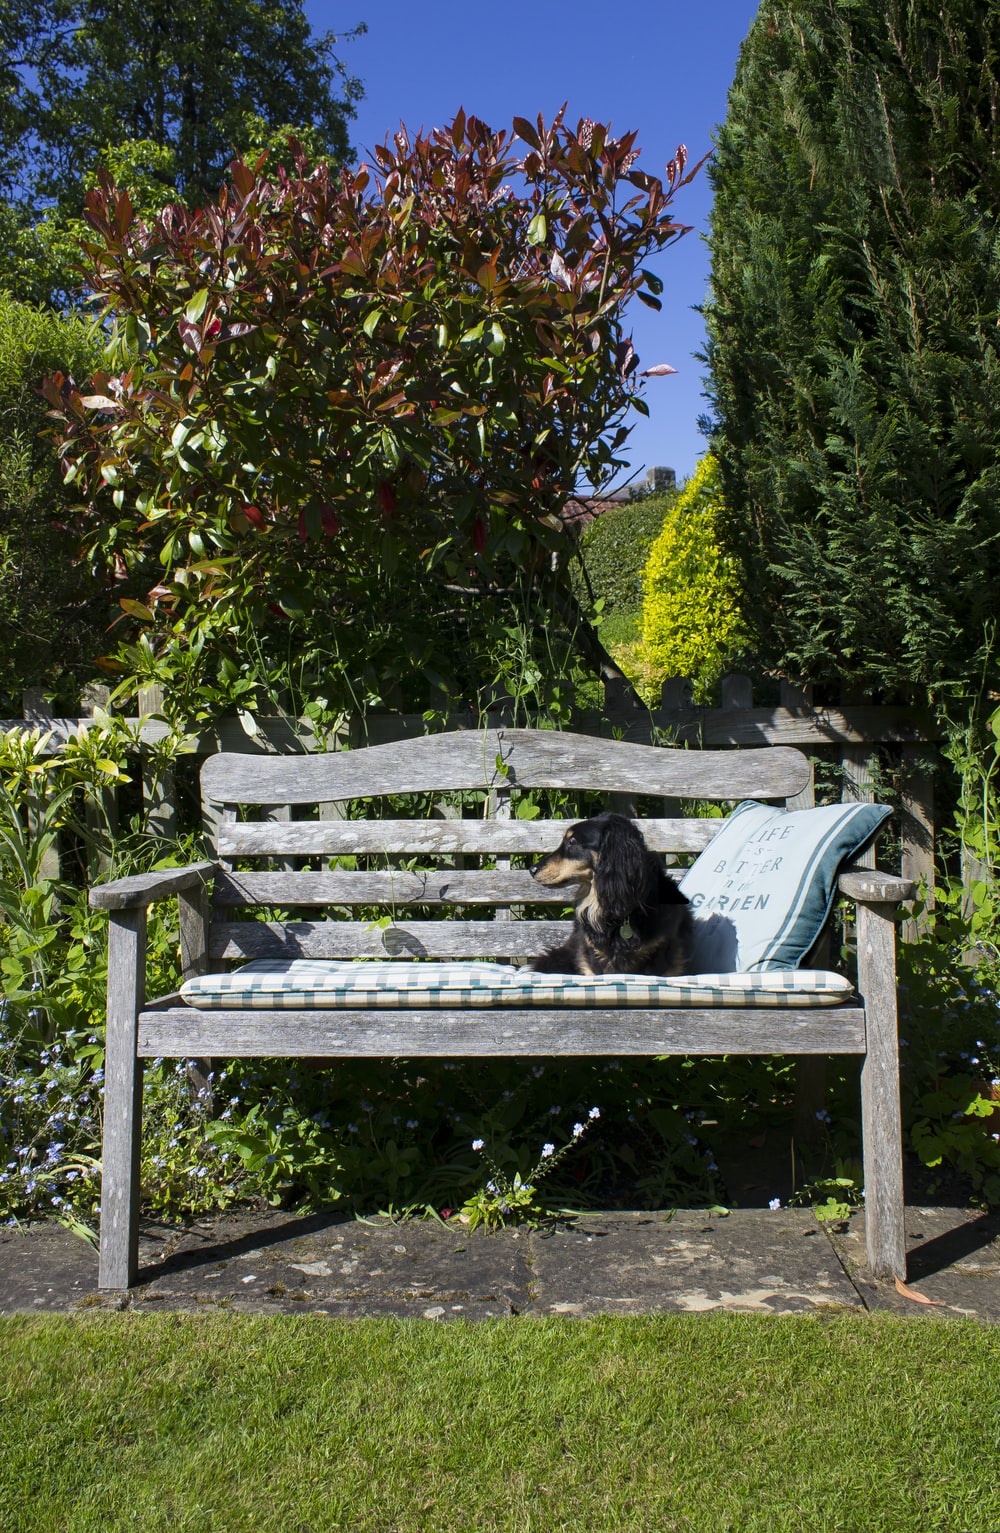 Garden Bench Picture. Download Free Image